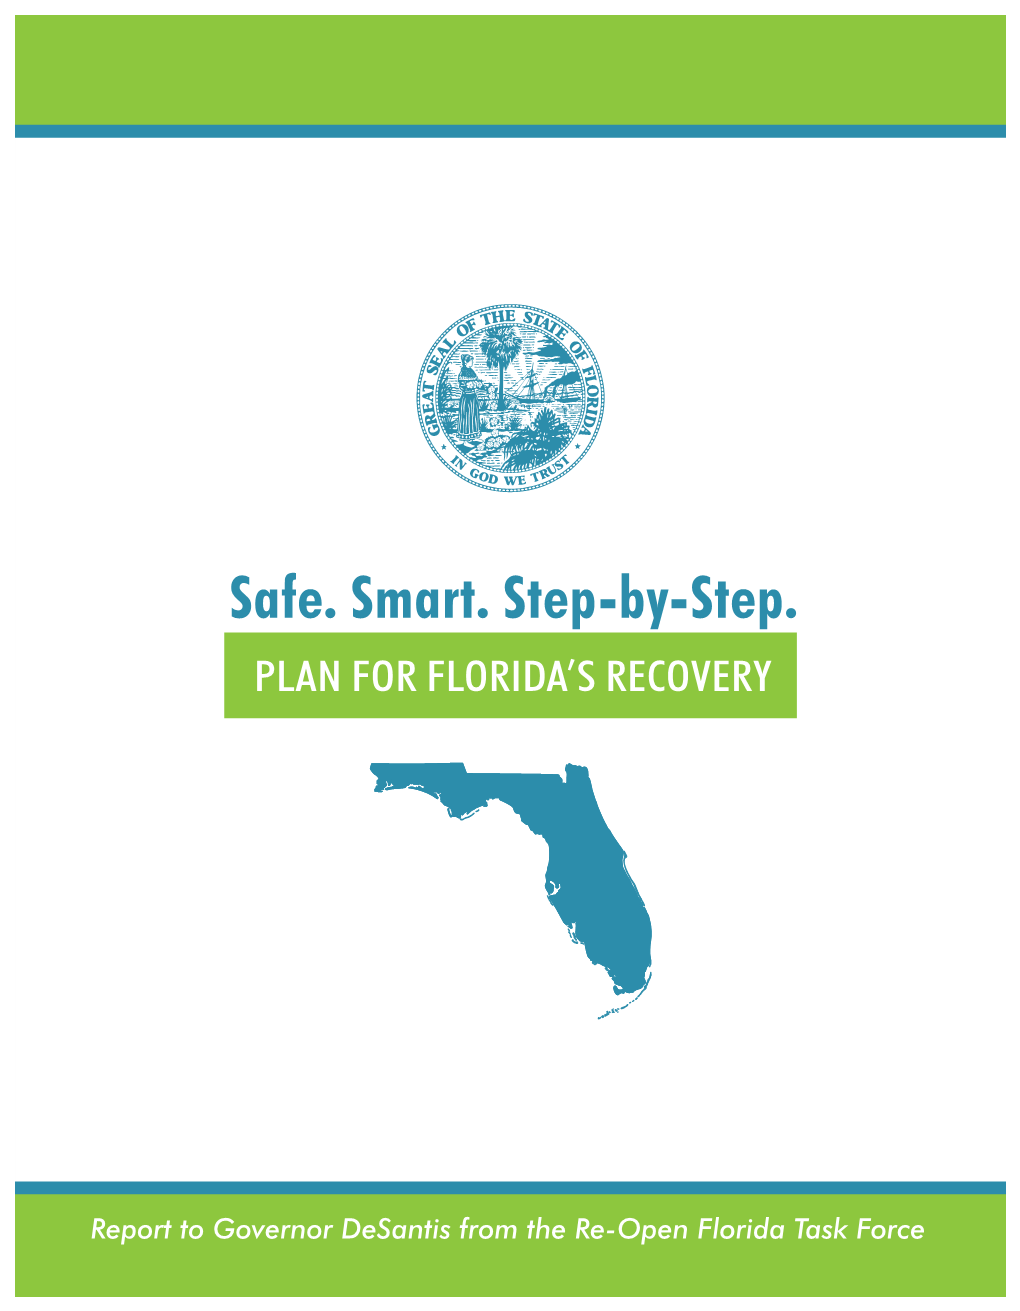 Safe. Smart. Step-By-Step. Plan for Florida's Recovery